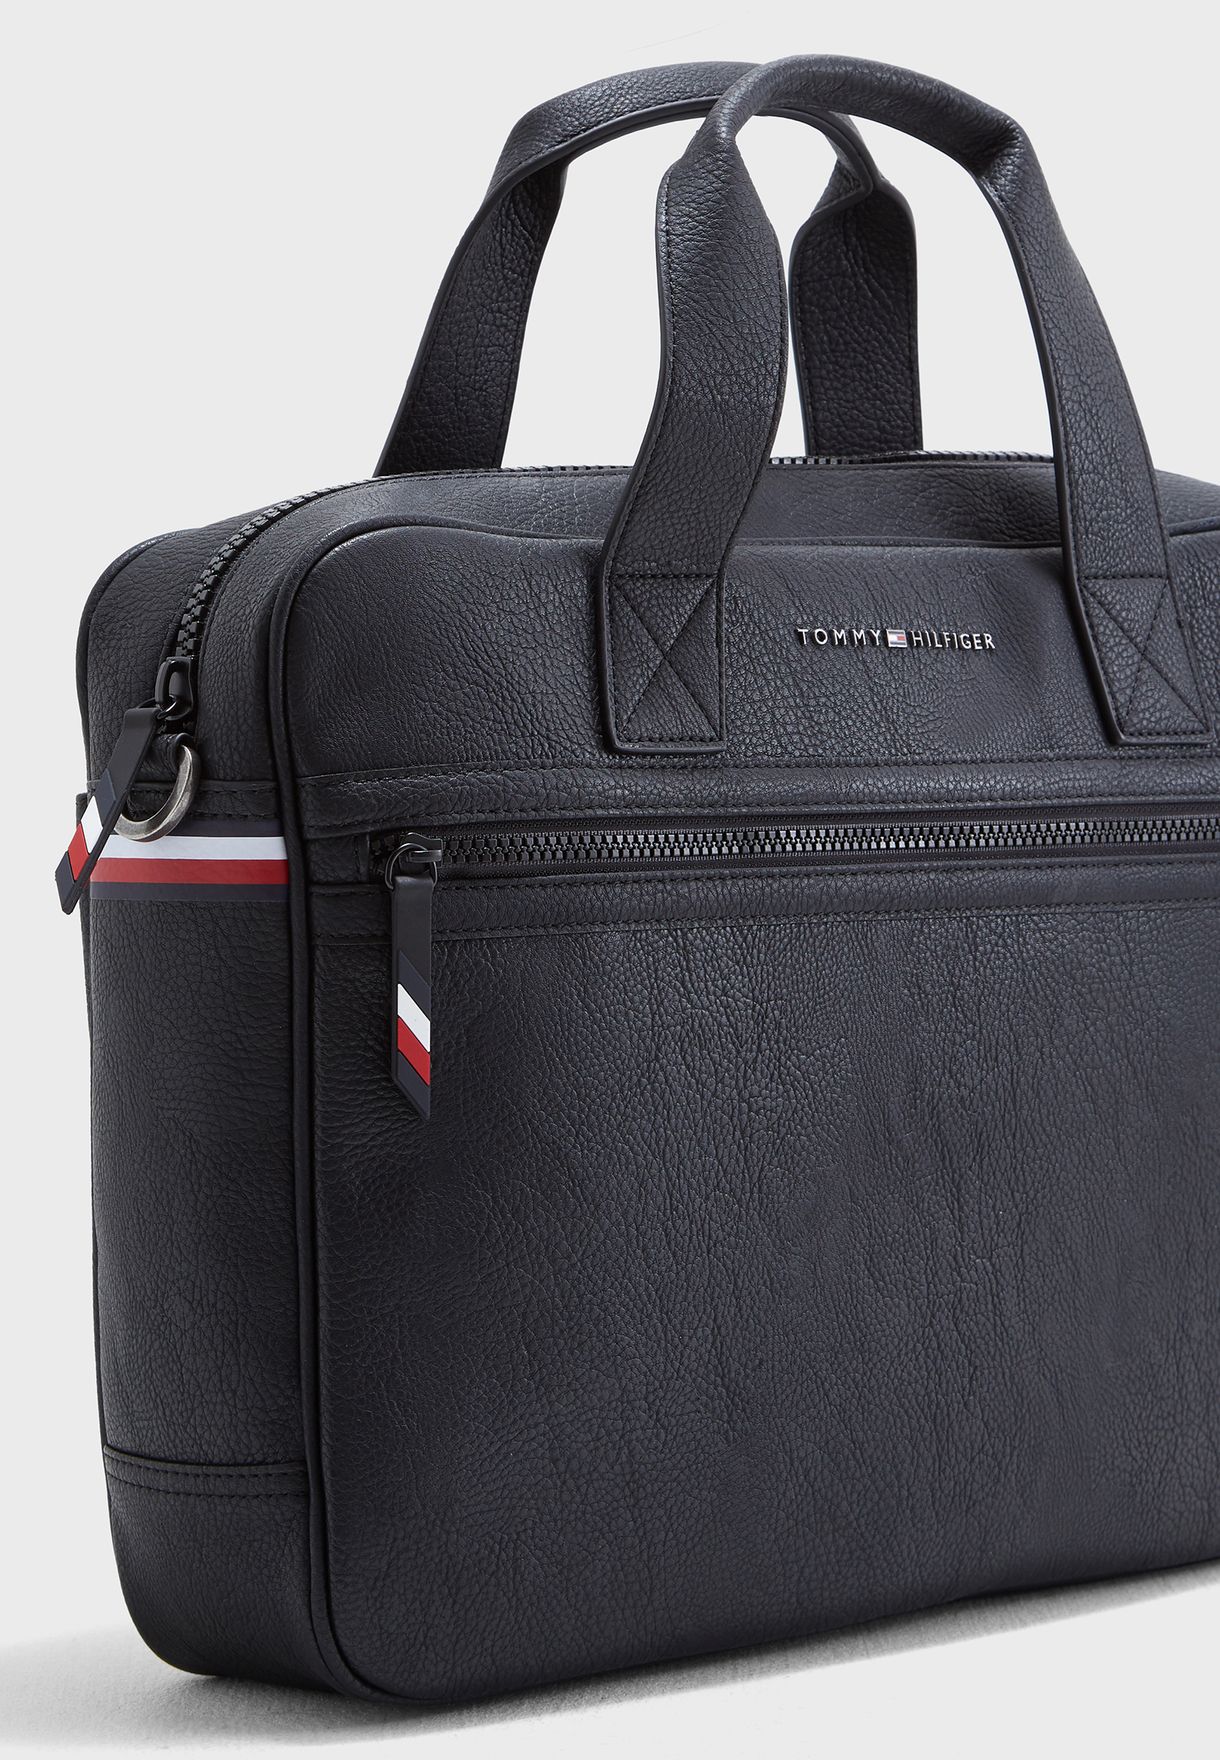 Buy > tommy hilfiger essential laptop bag > in stock